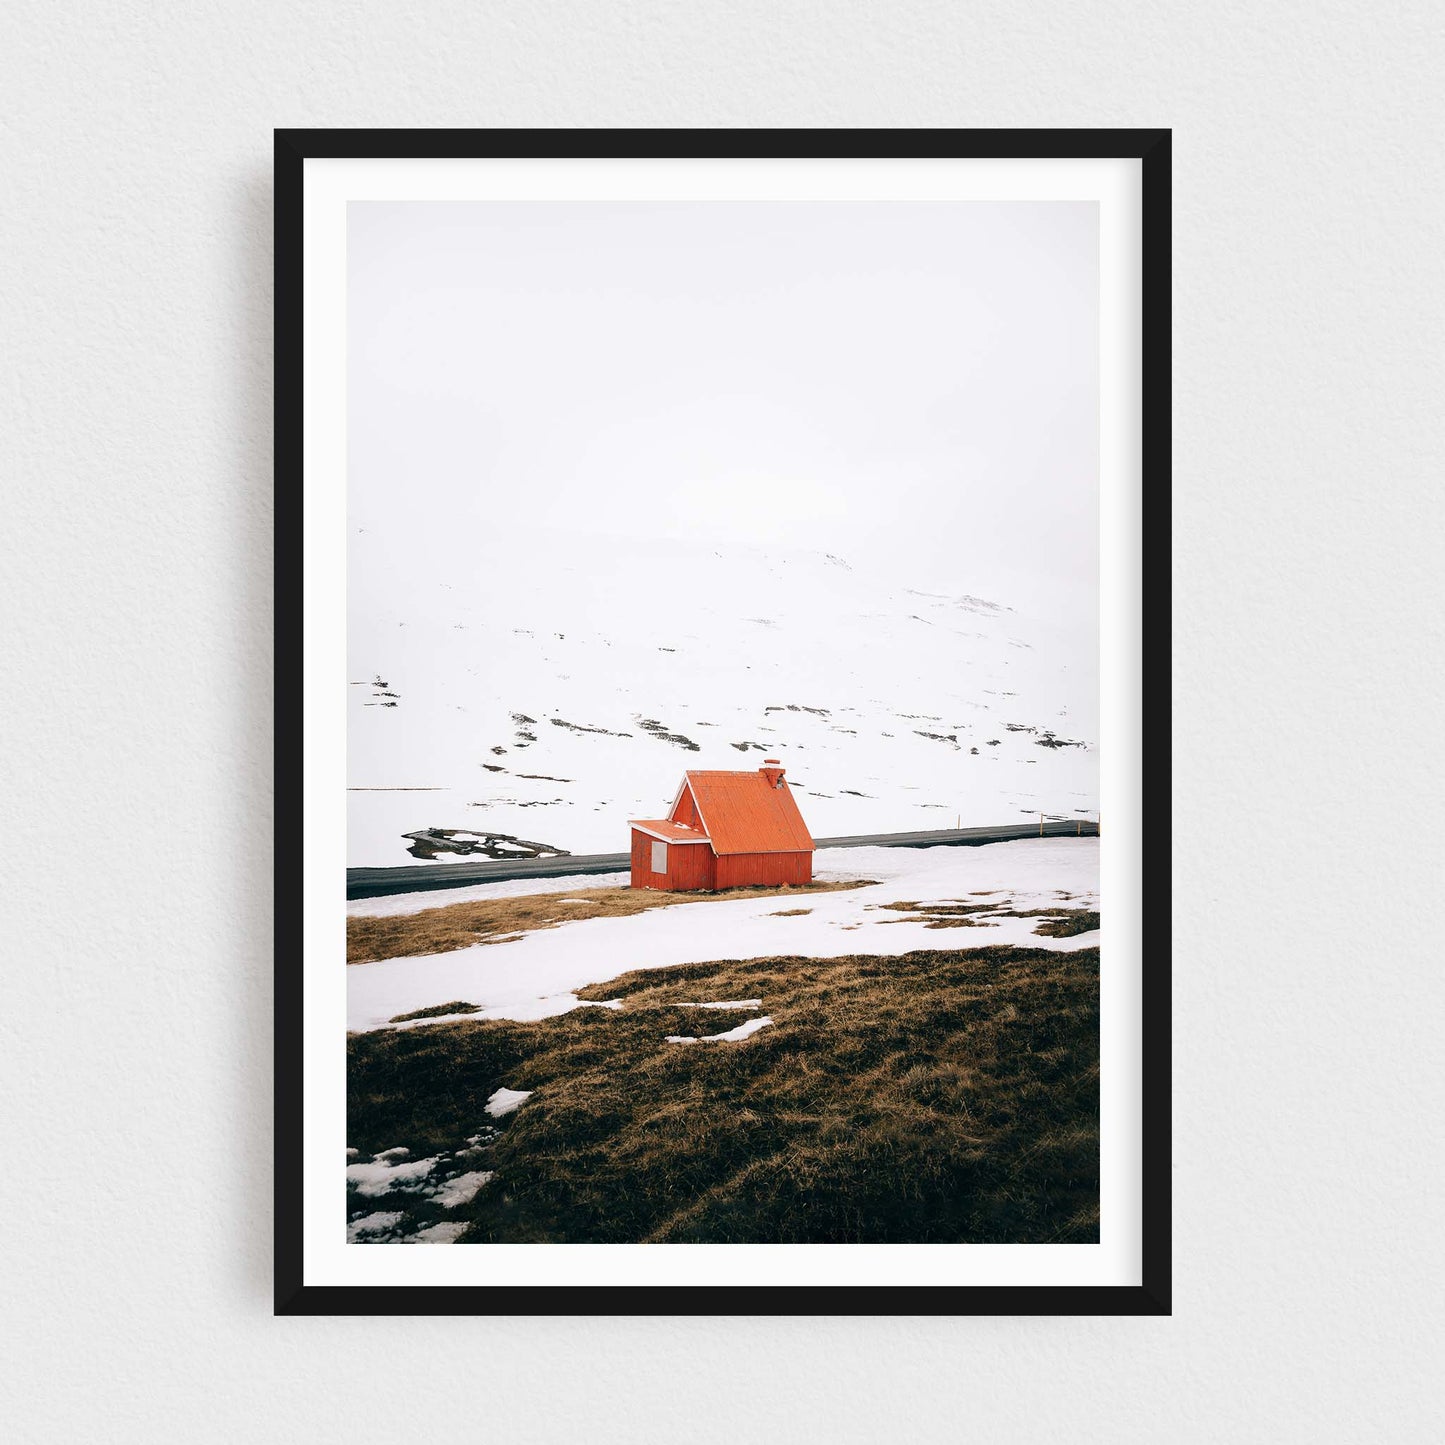 Iceland fine art photography print featuring a red cabin in winter, in a black frame